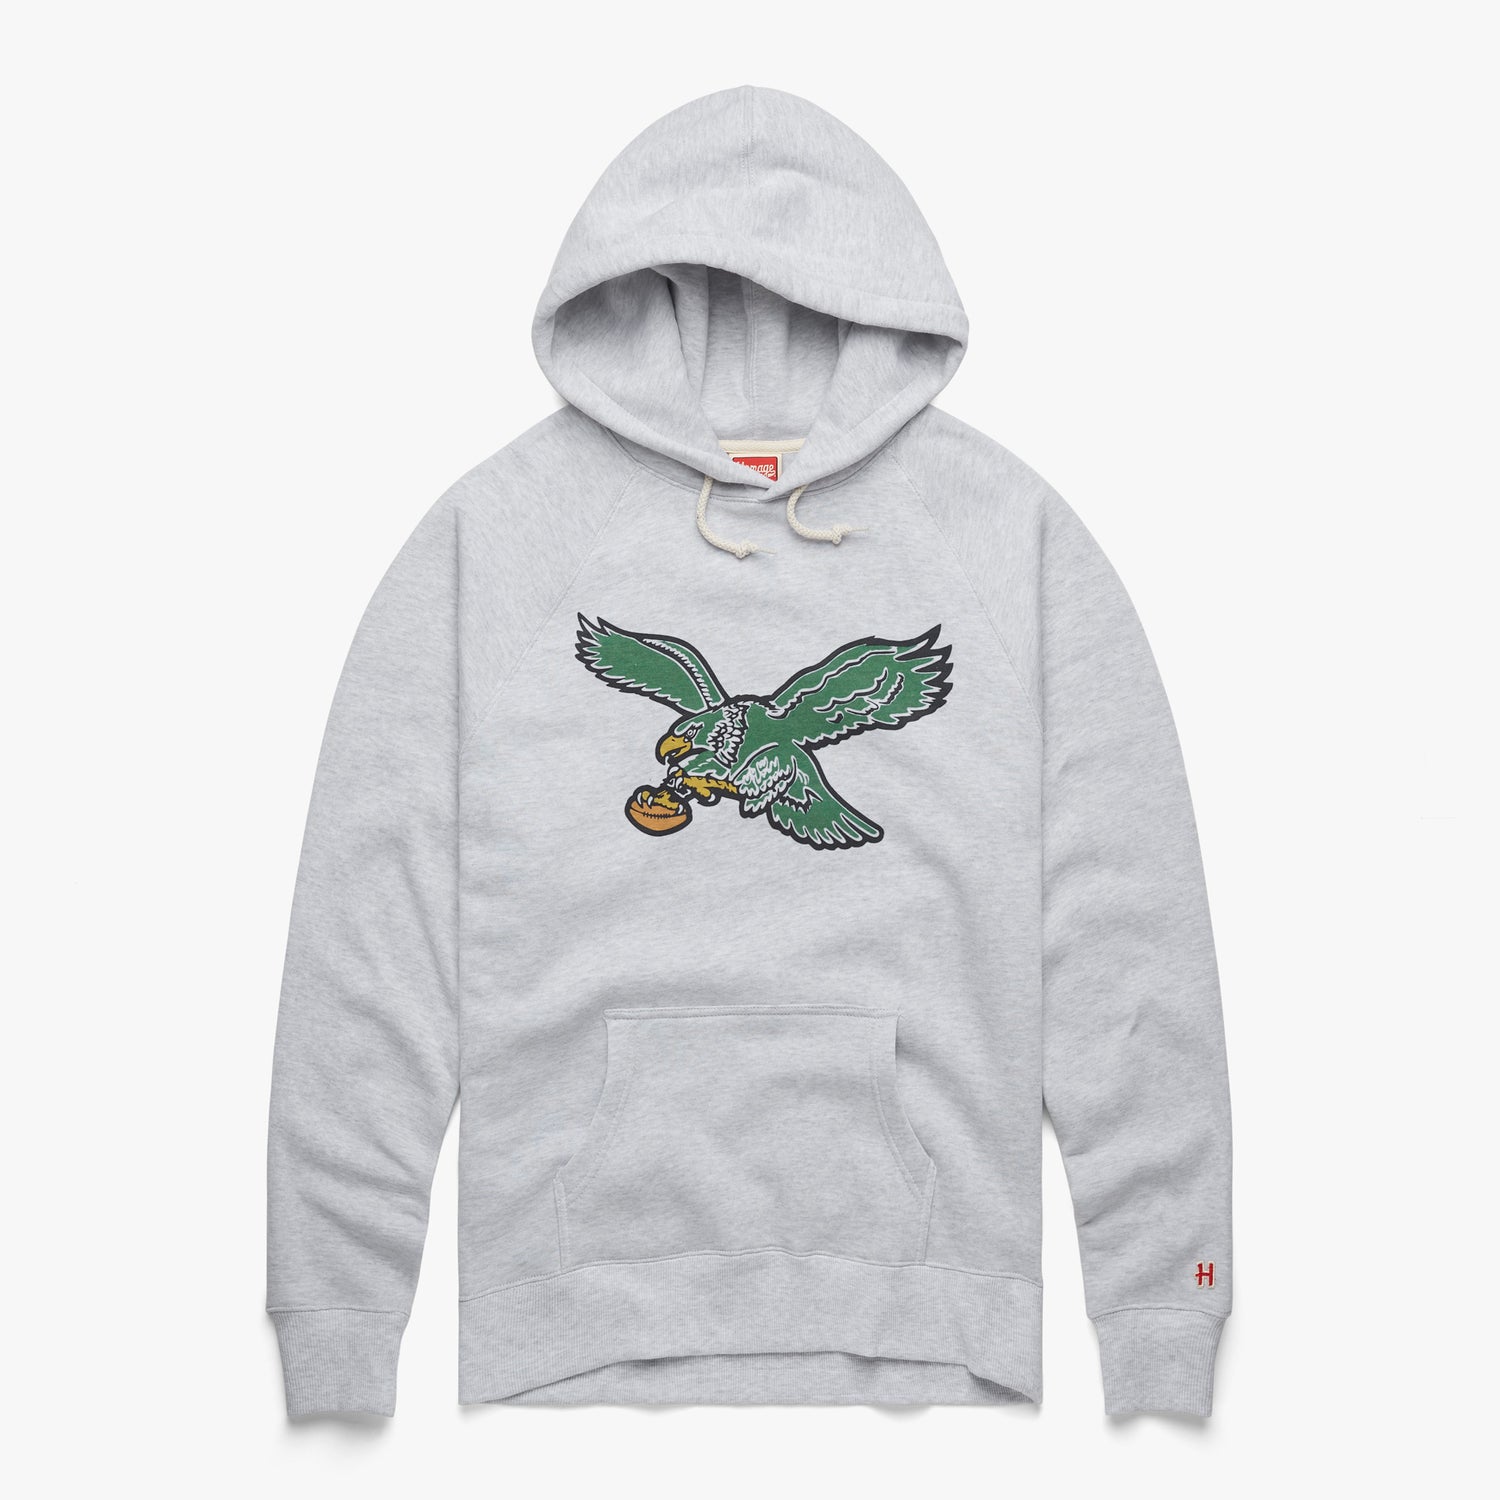 Philadelphia Eagles '87 Hoodie | Kelly Green Eagles Apparel from Homage. | Officially Licensed NFL Apparel from Homage Pro Shop.